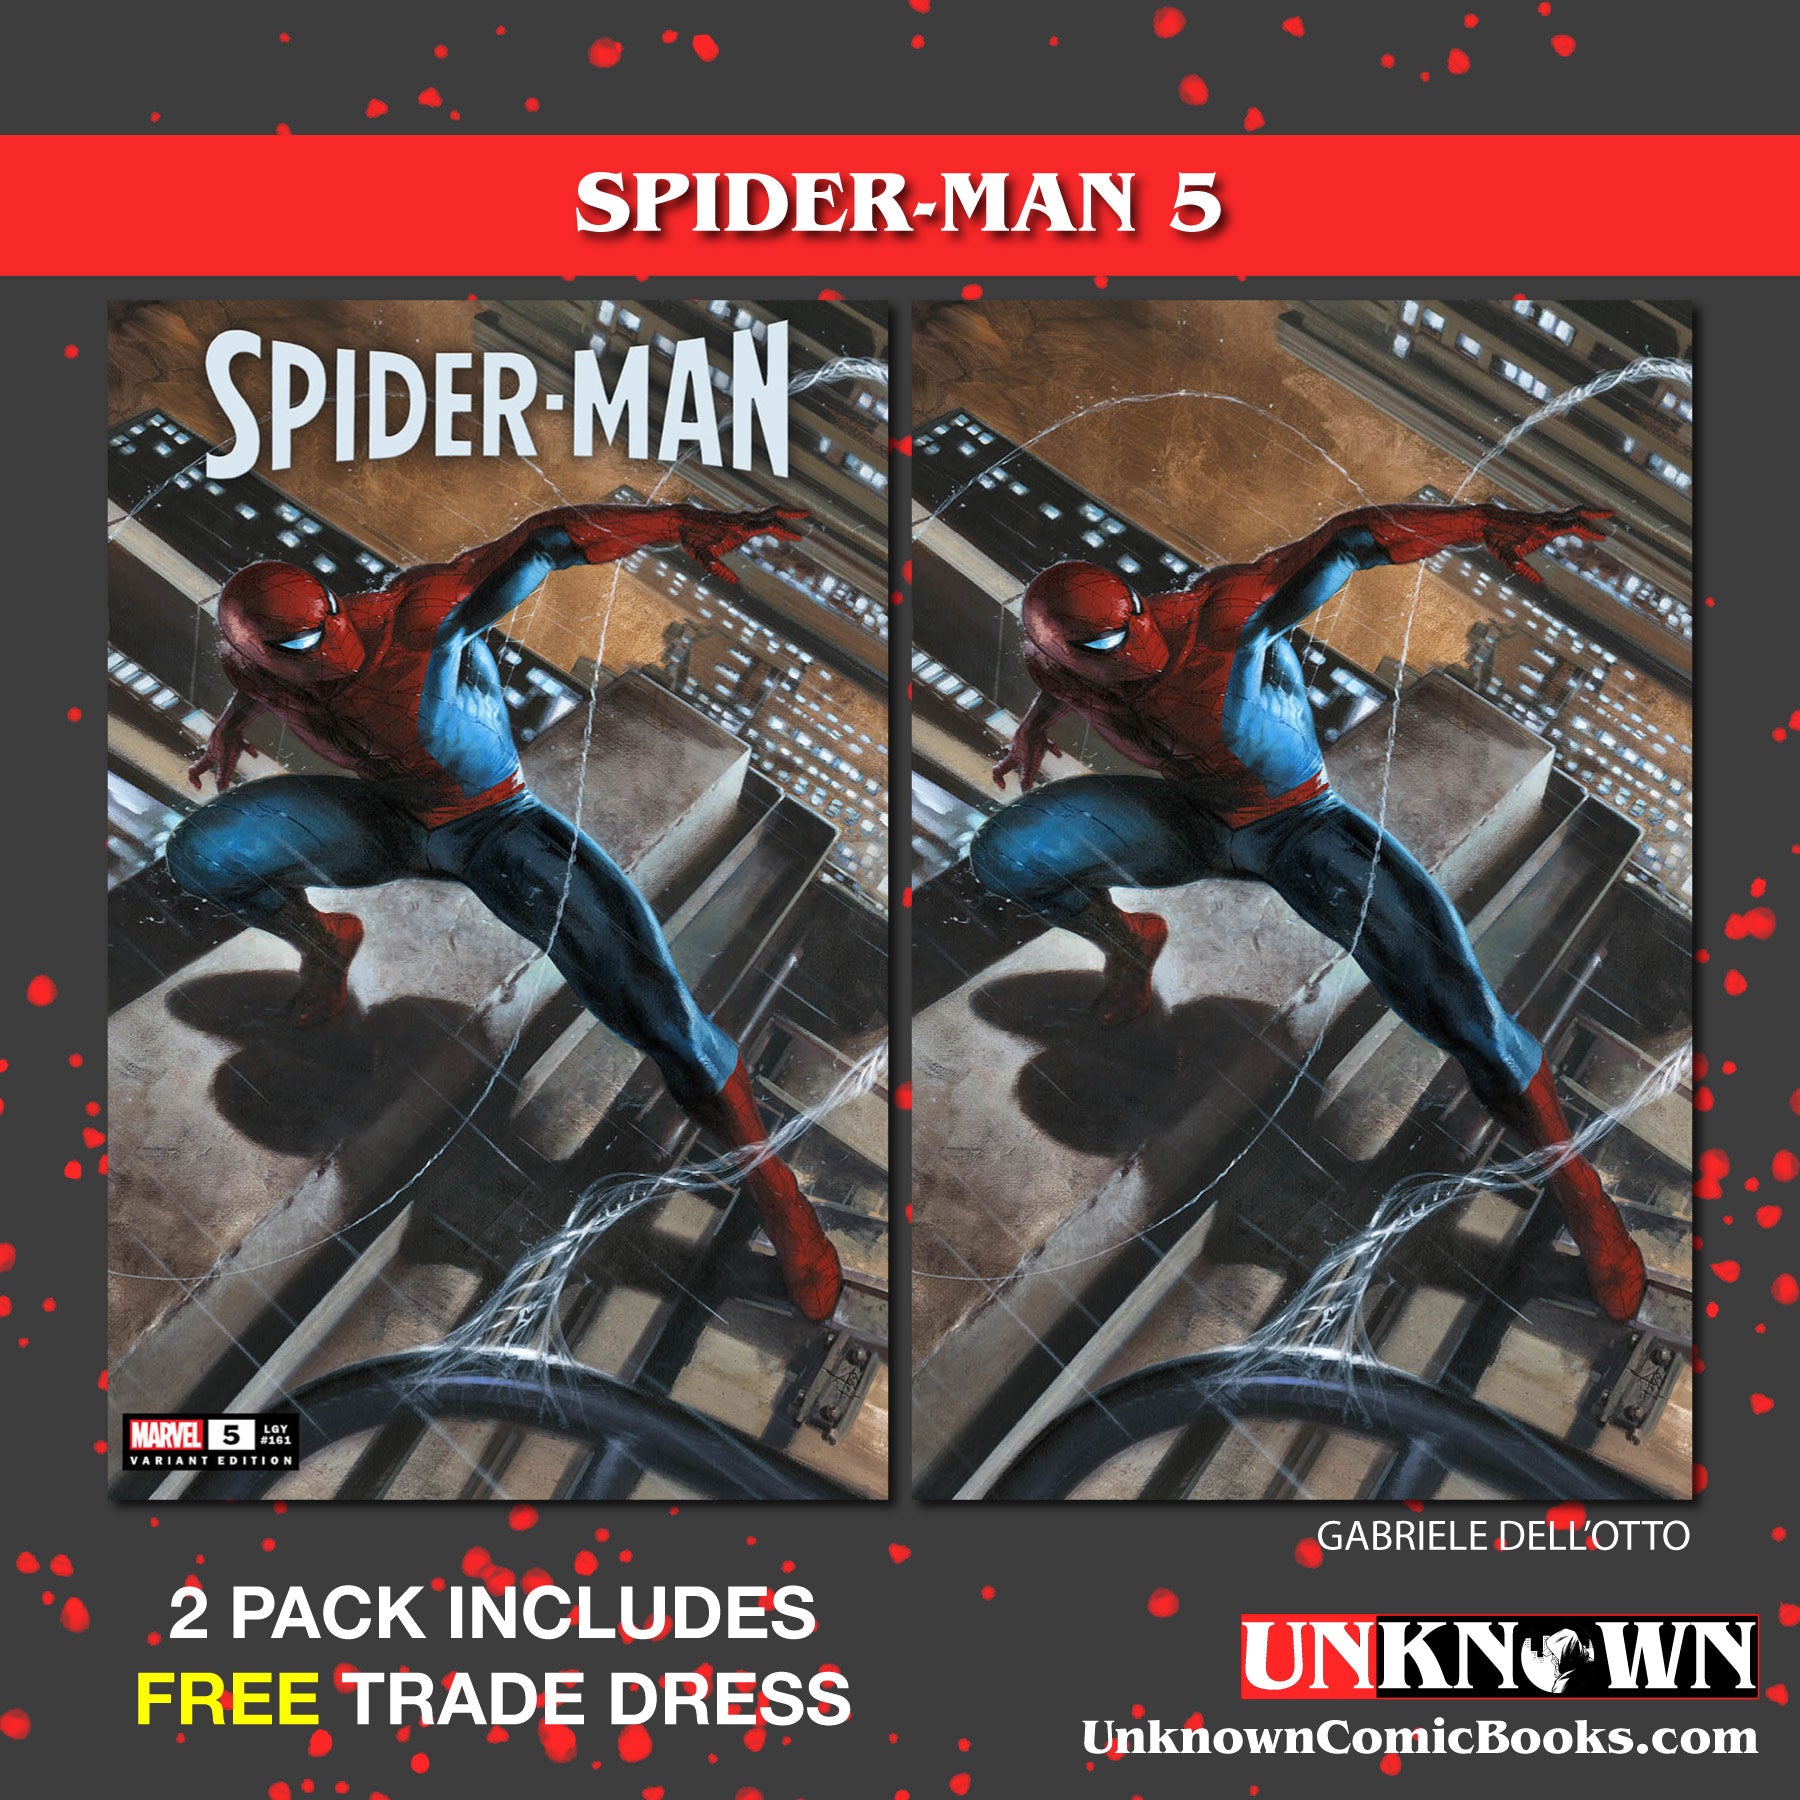 [2 PACK] **FREE TRADE DRESS** SPIDER-MAN #5 UNKNOWN COMICS DELL'OTTO EXCLUSIVE VAR (02/15/2023)